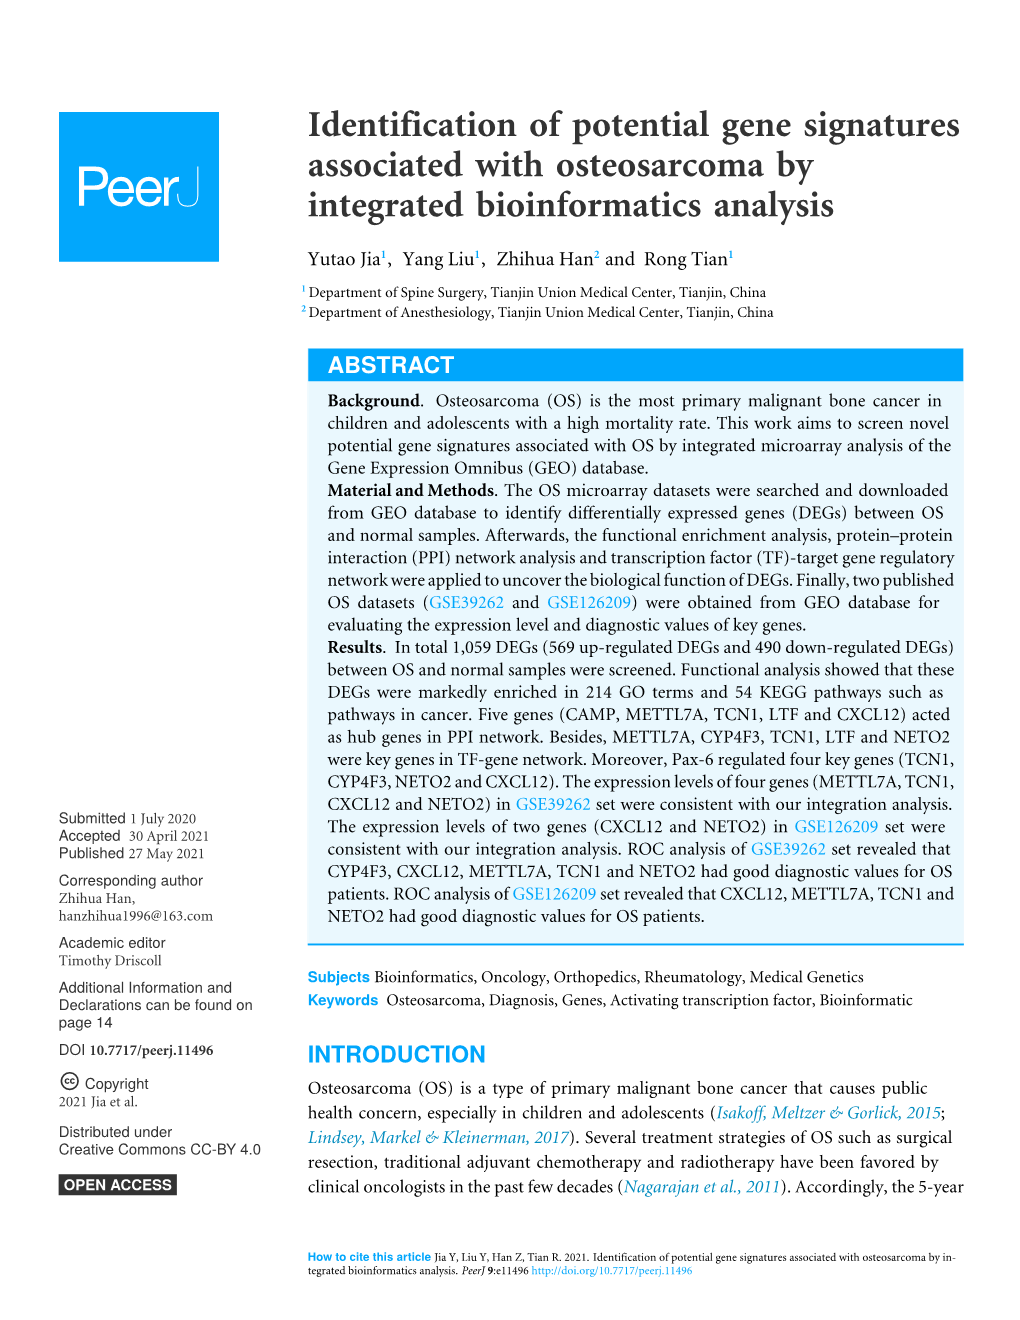 Identification of Potential Gene Signatures Associated with Osteosarcoma by Integrated Bioinformatics Analysis